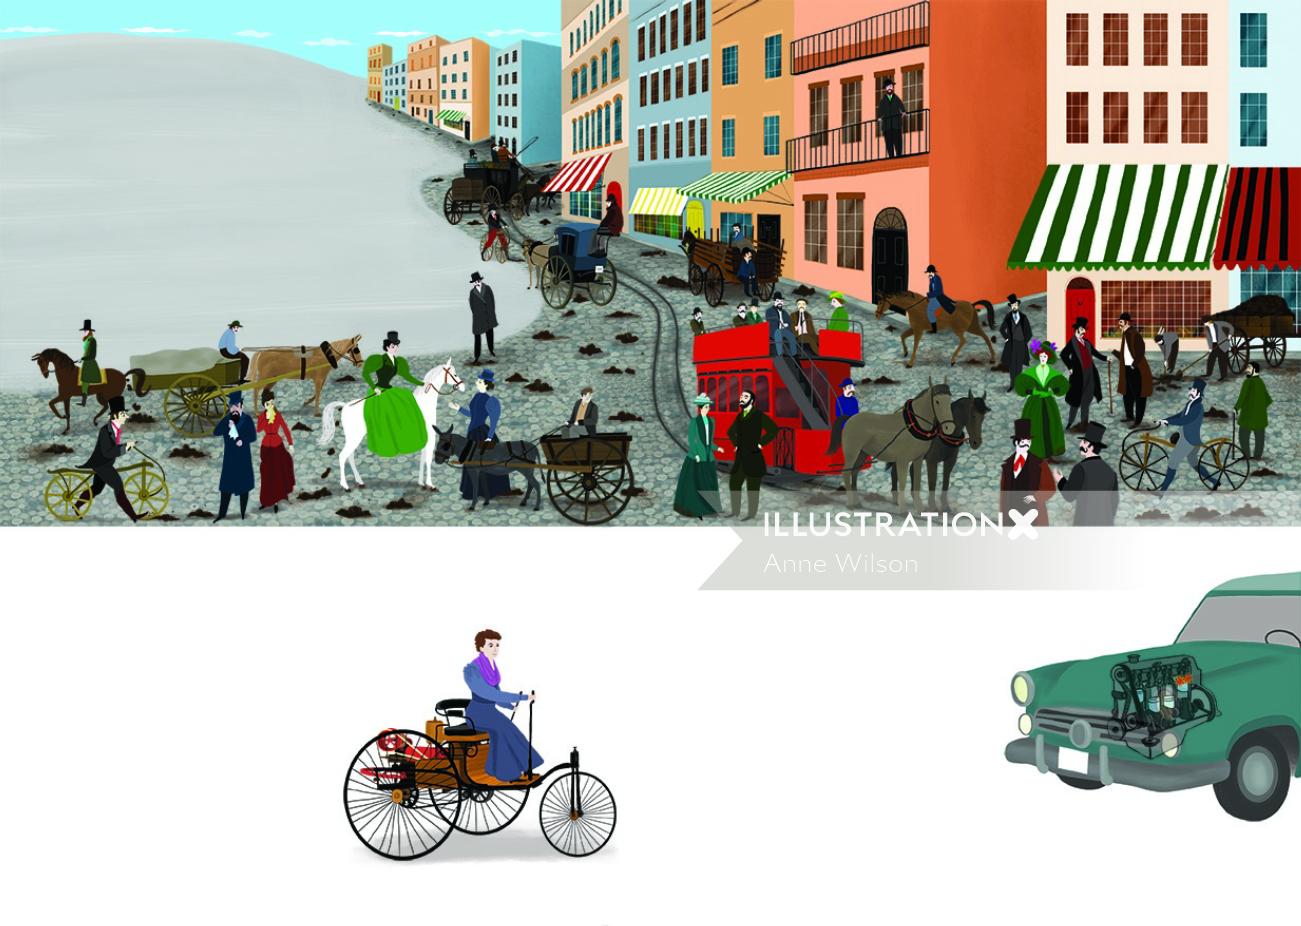 cars, horses, people, city, inventions